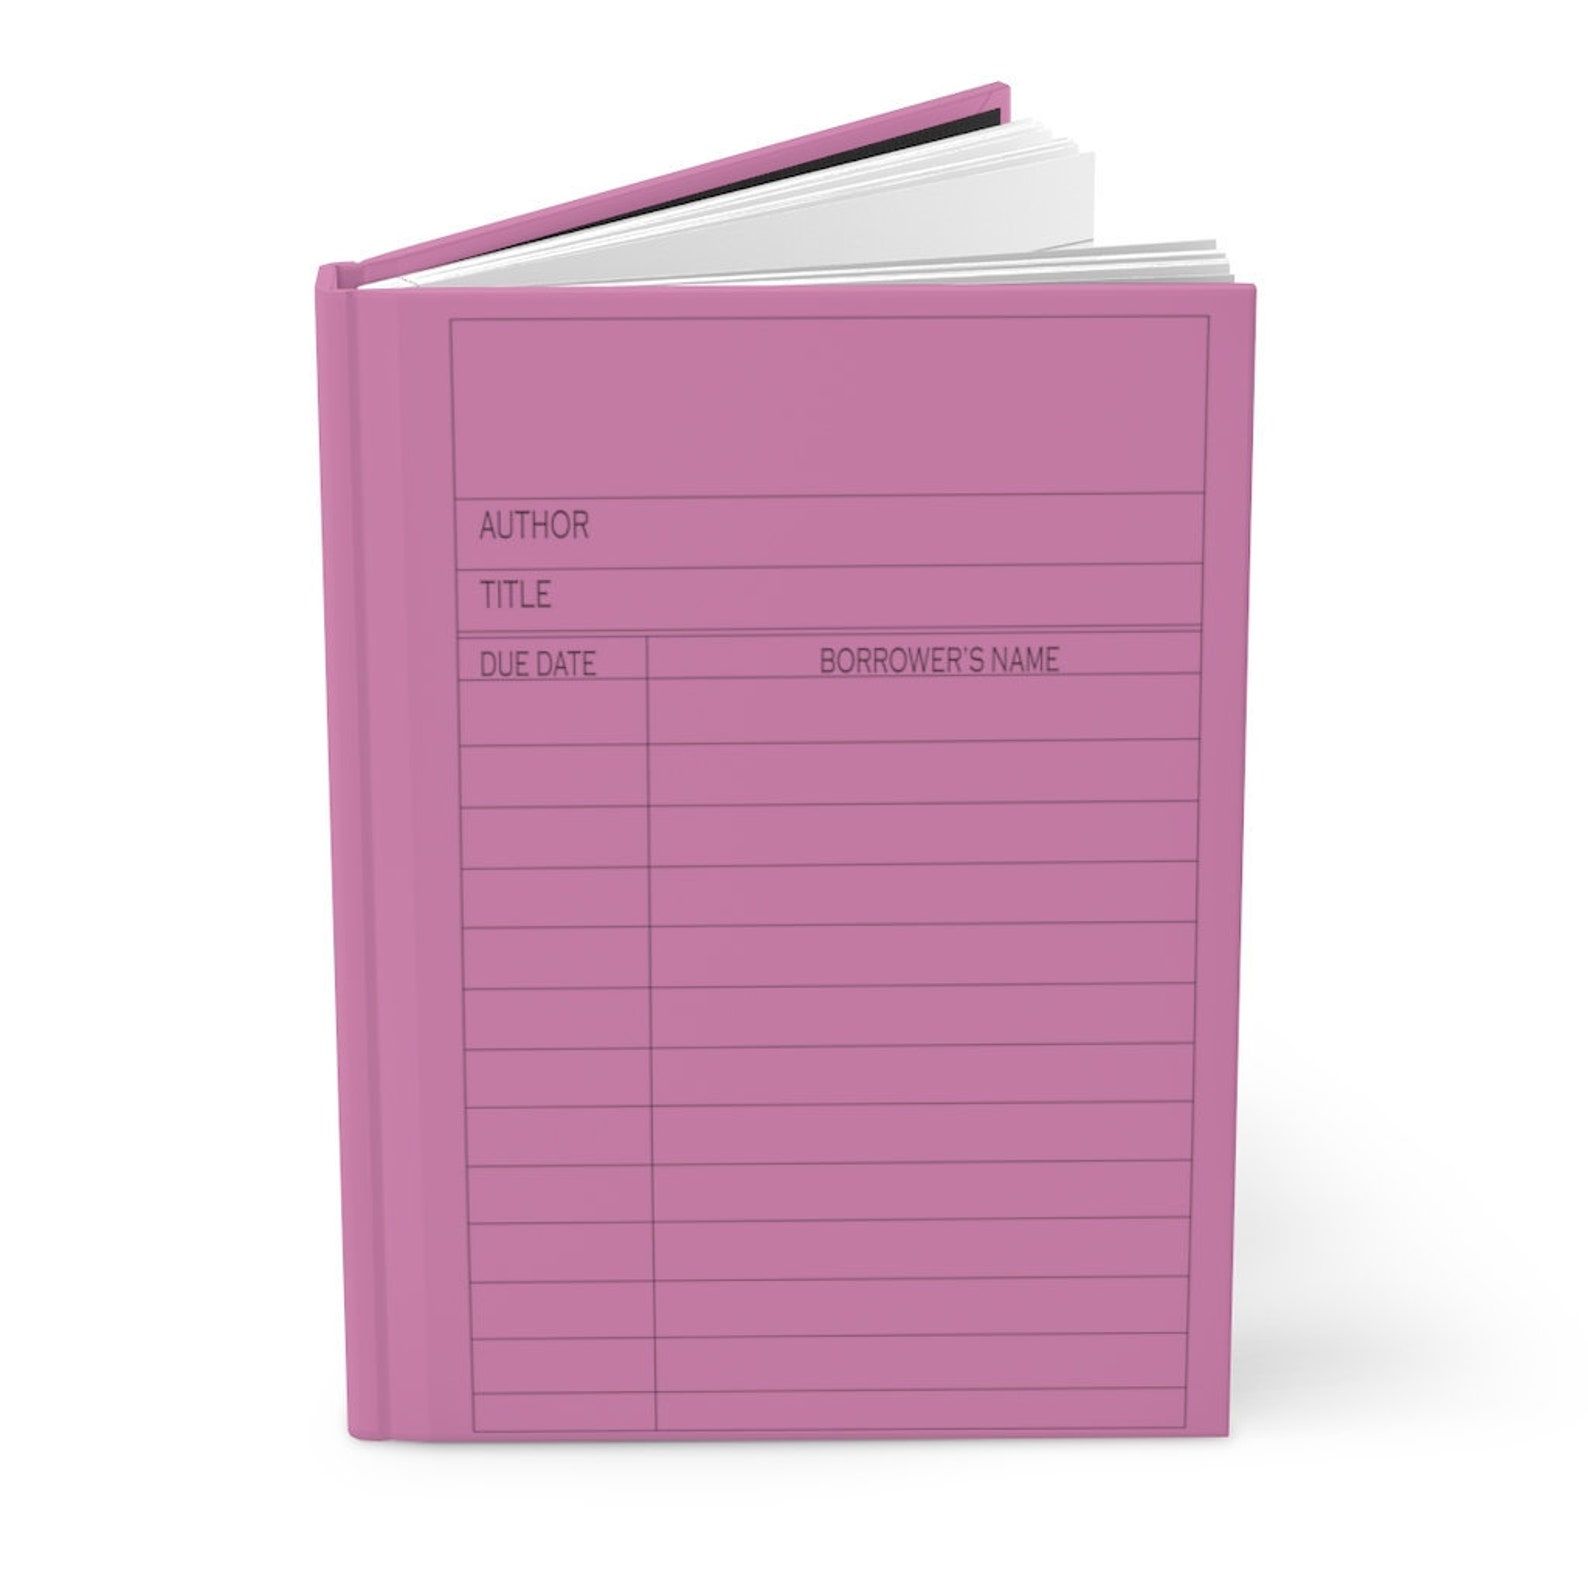 Pink notebook with a hard cover. The design of the cover is a library due date card. 